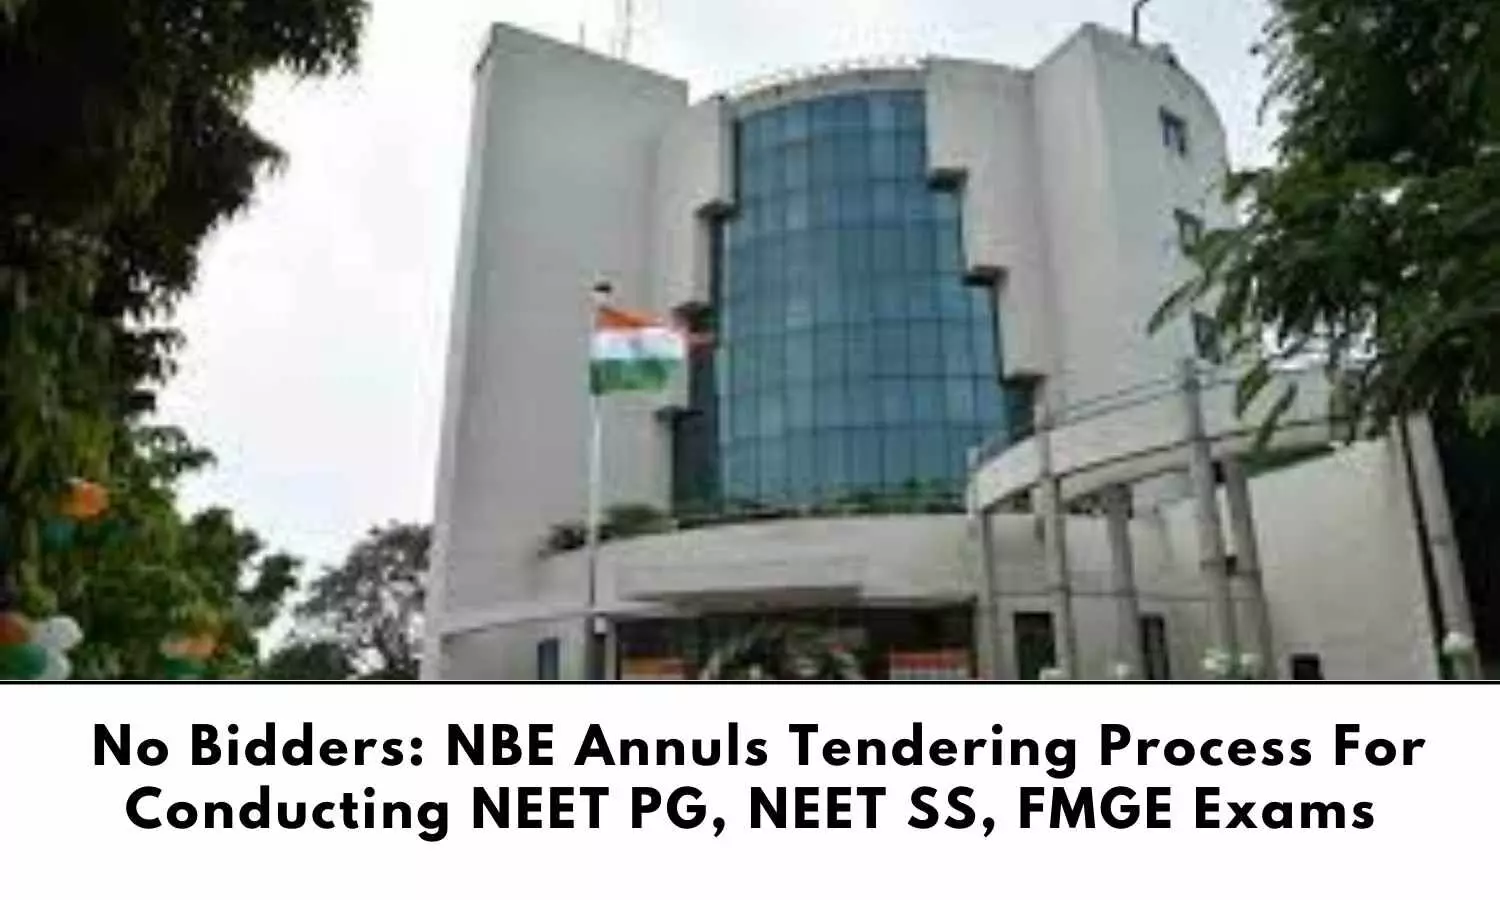 NBE annuls tendering process for conducting NEET PG, NEET SS, FMGE exams over non participation of bidders